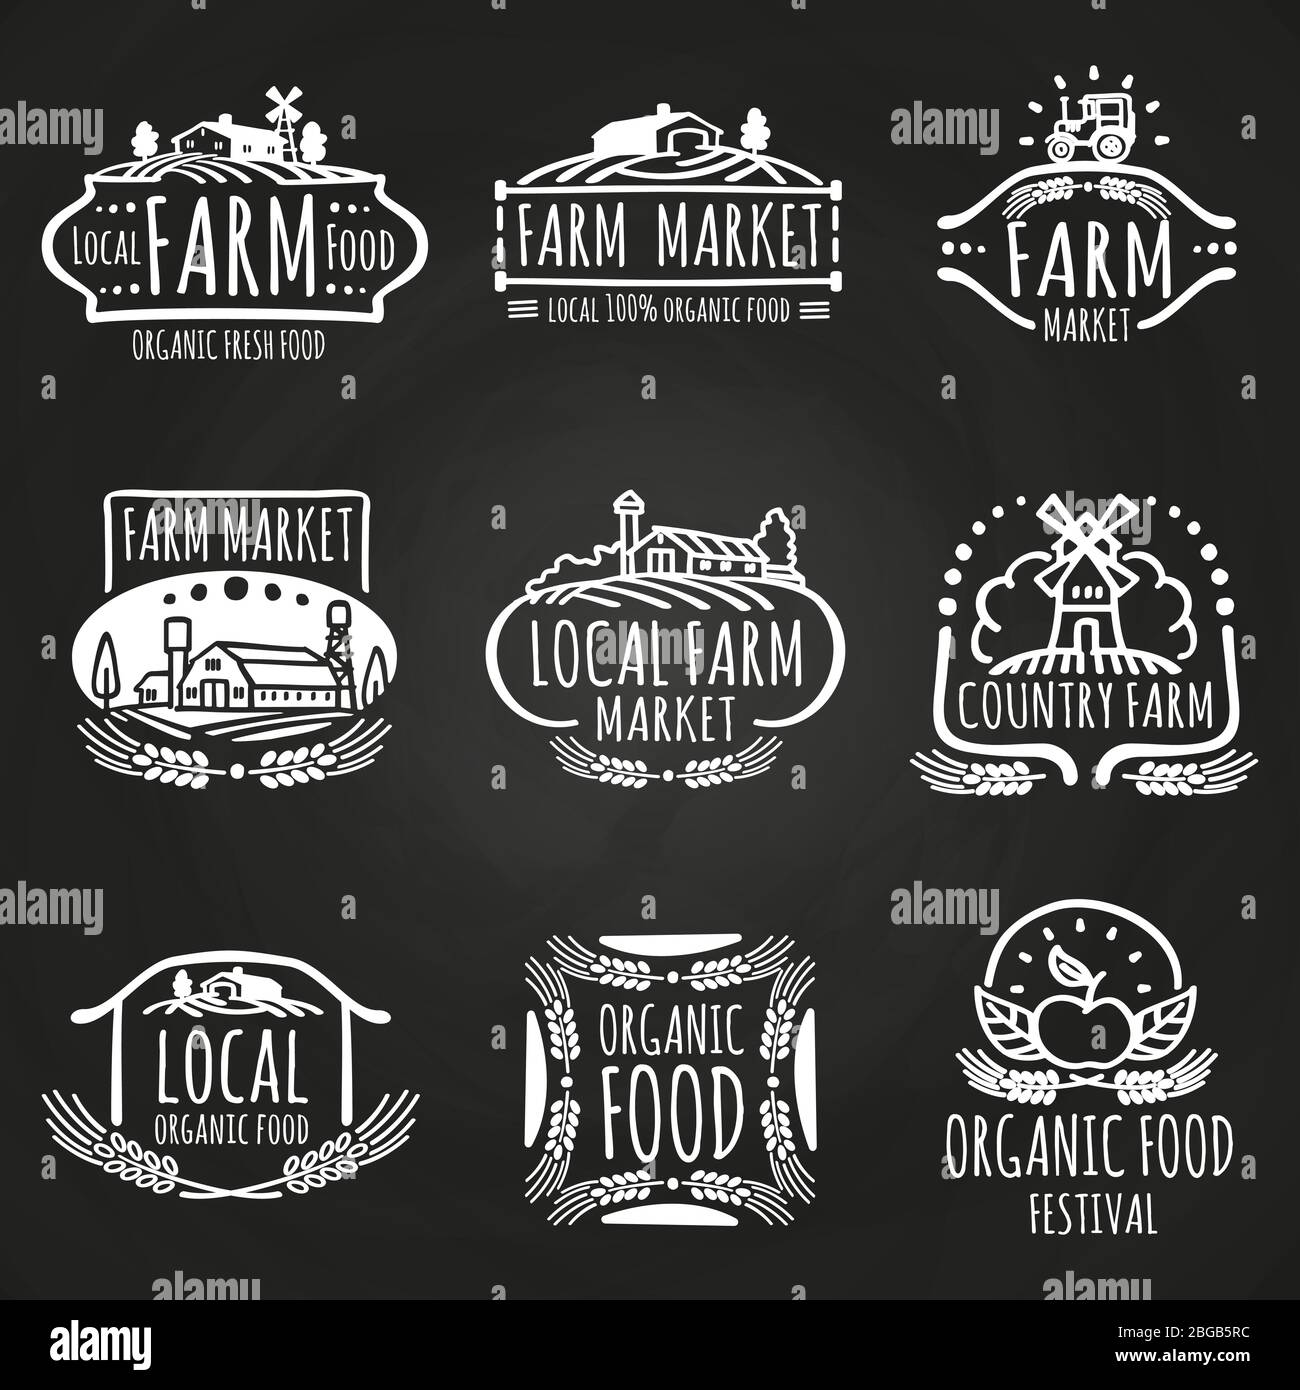 Farm market and food festival hand drawn chalk banners set. Vector illustration Stock Vector